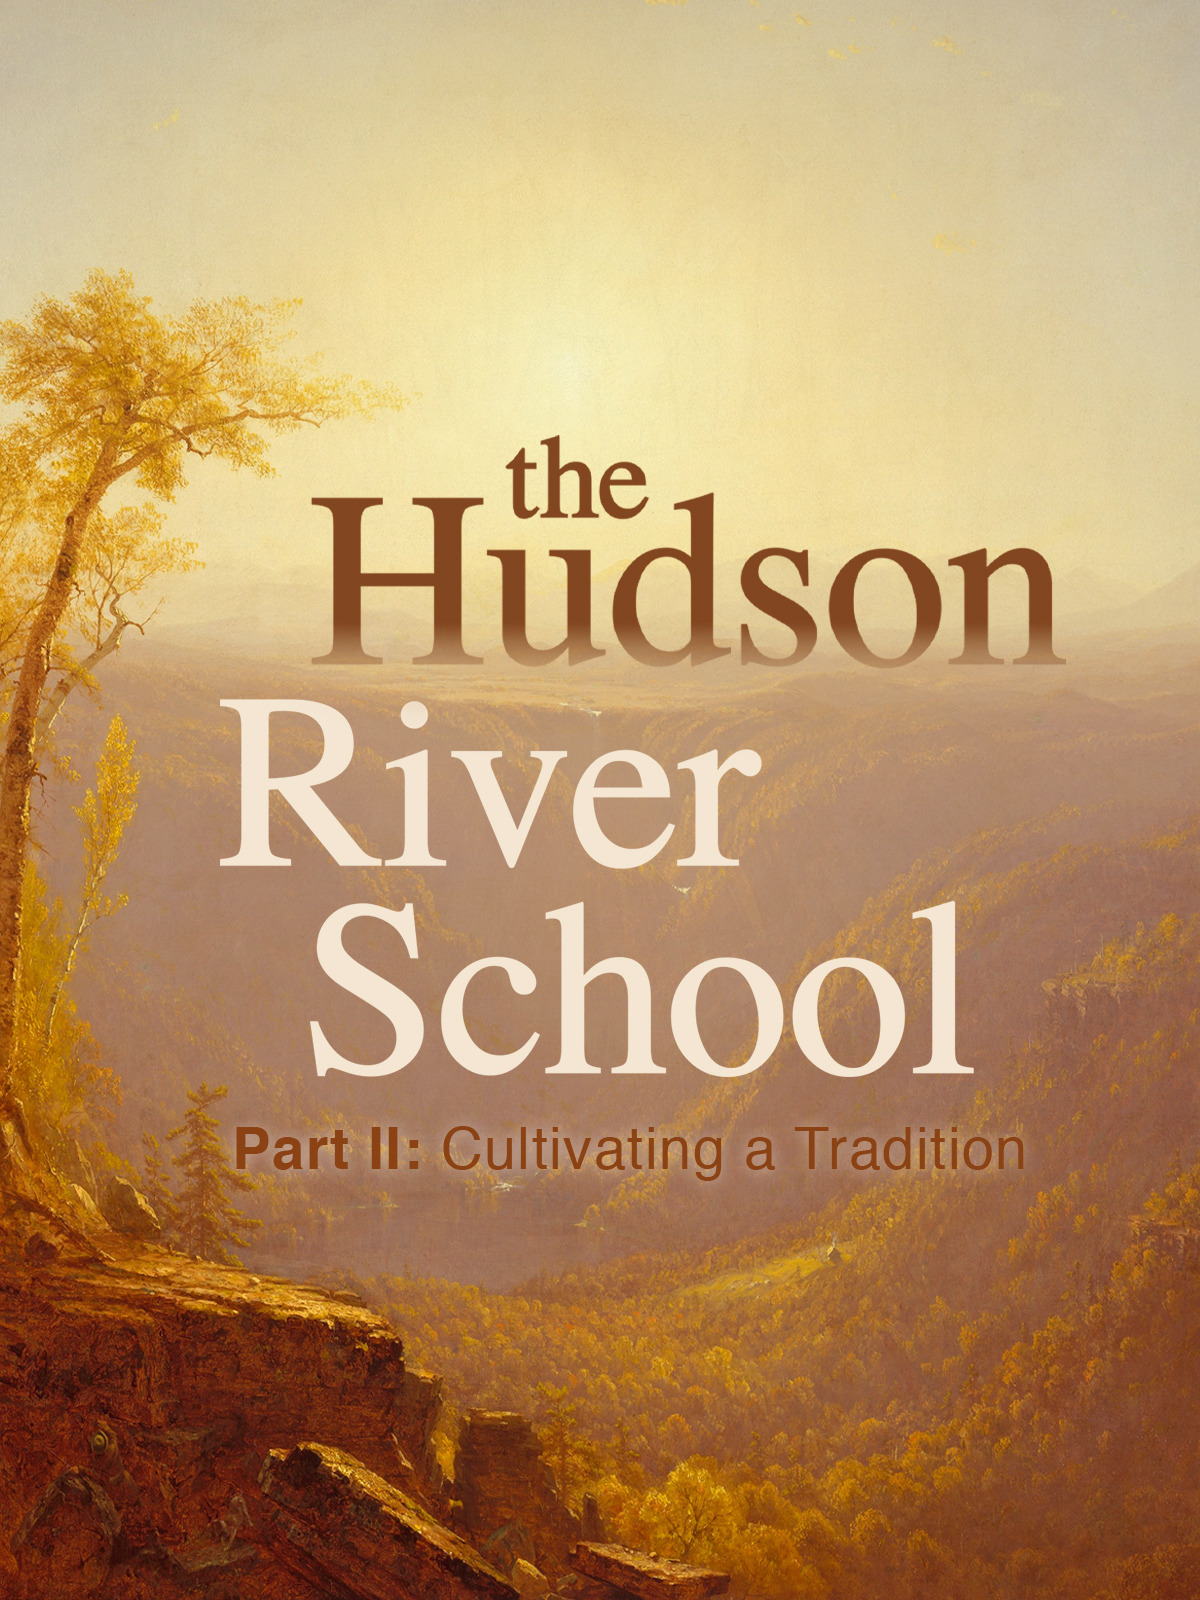 The Hudson River School: Part 2 - Cultivating a Tradition